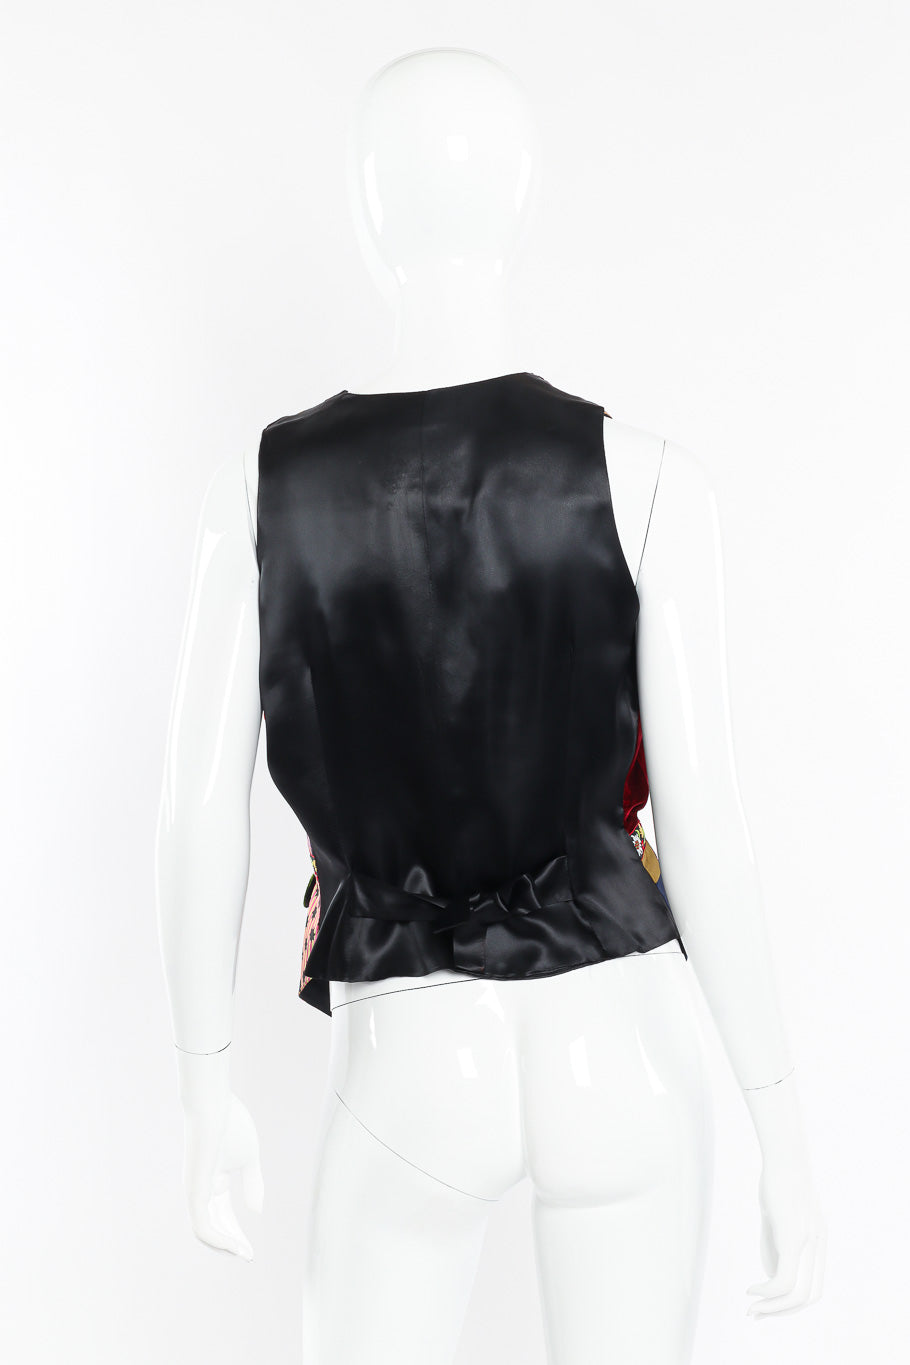 Silk and wool patchwork vest by Todd Oldham on mannequin back @recessla